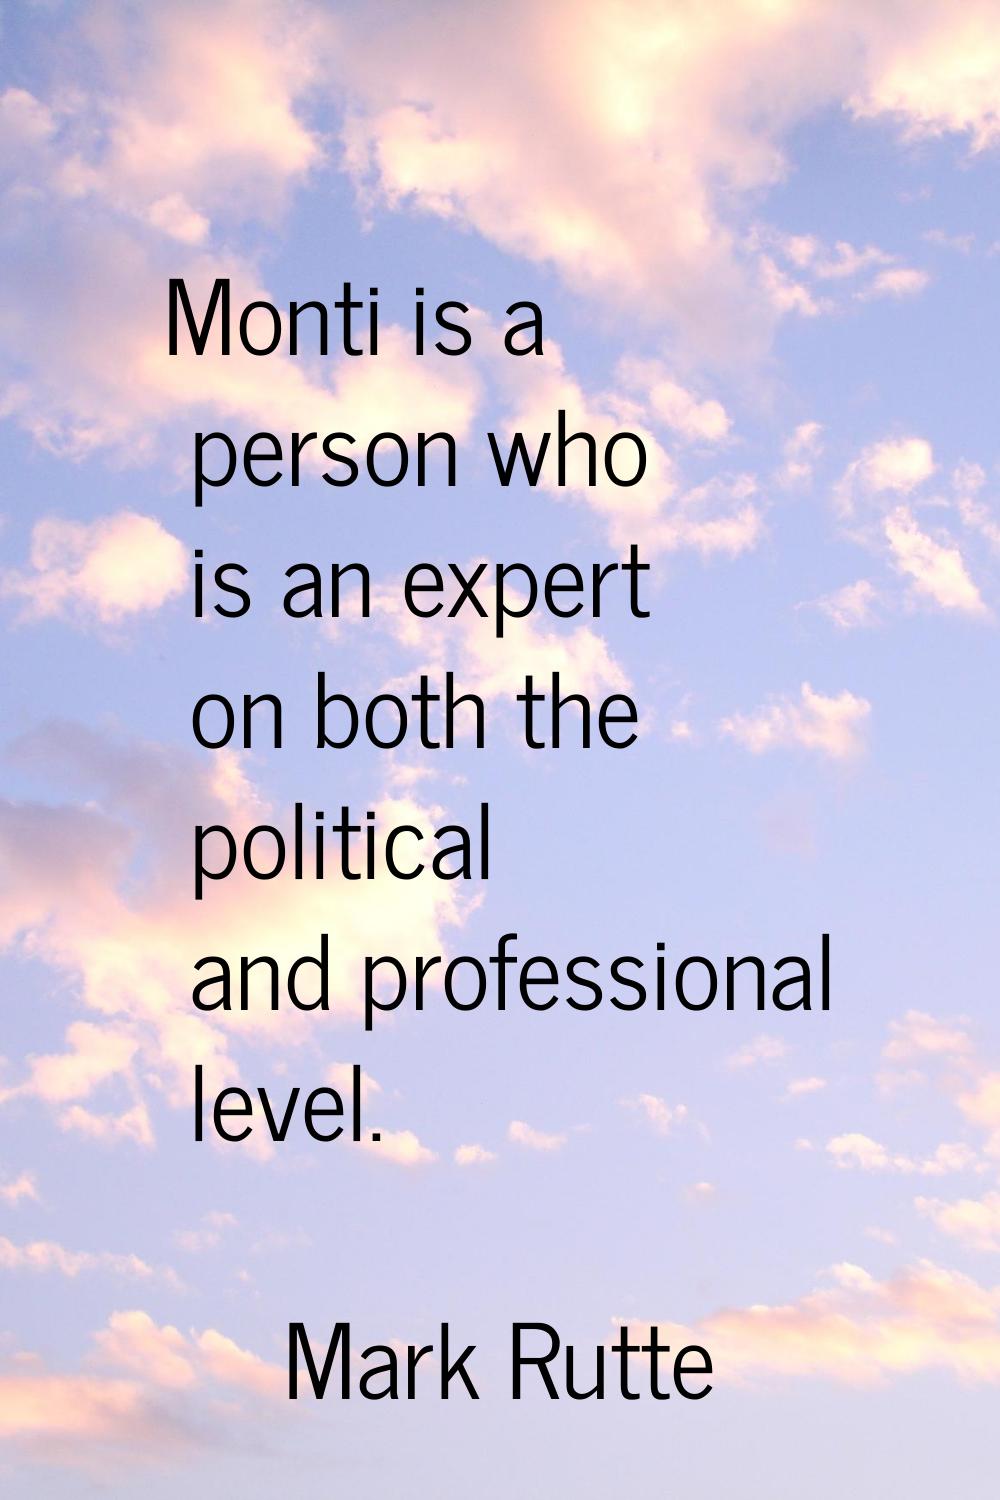 Monti is a person who is an expert on both the political and professional level.